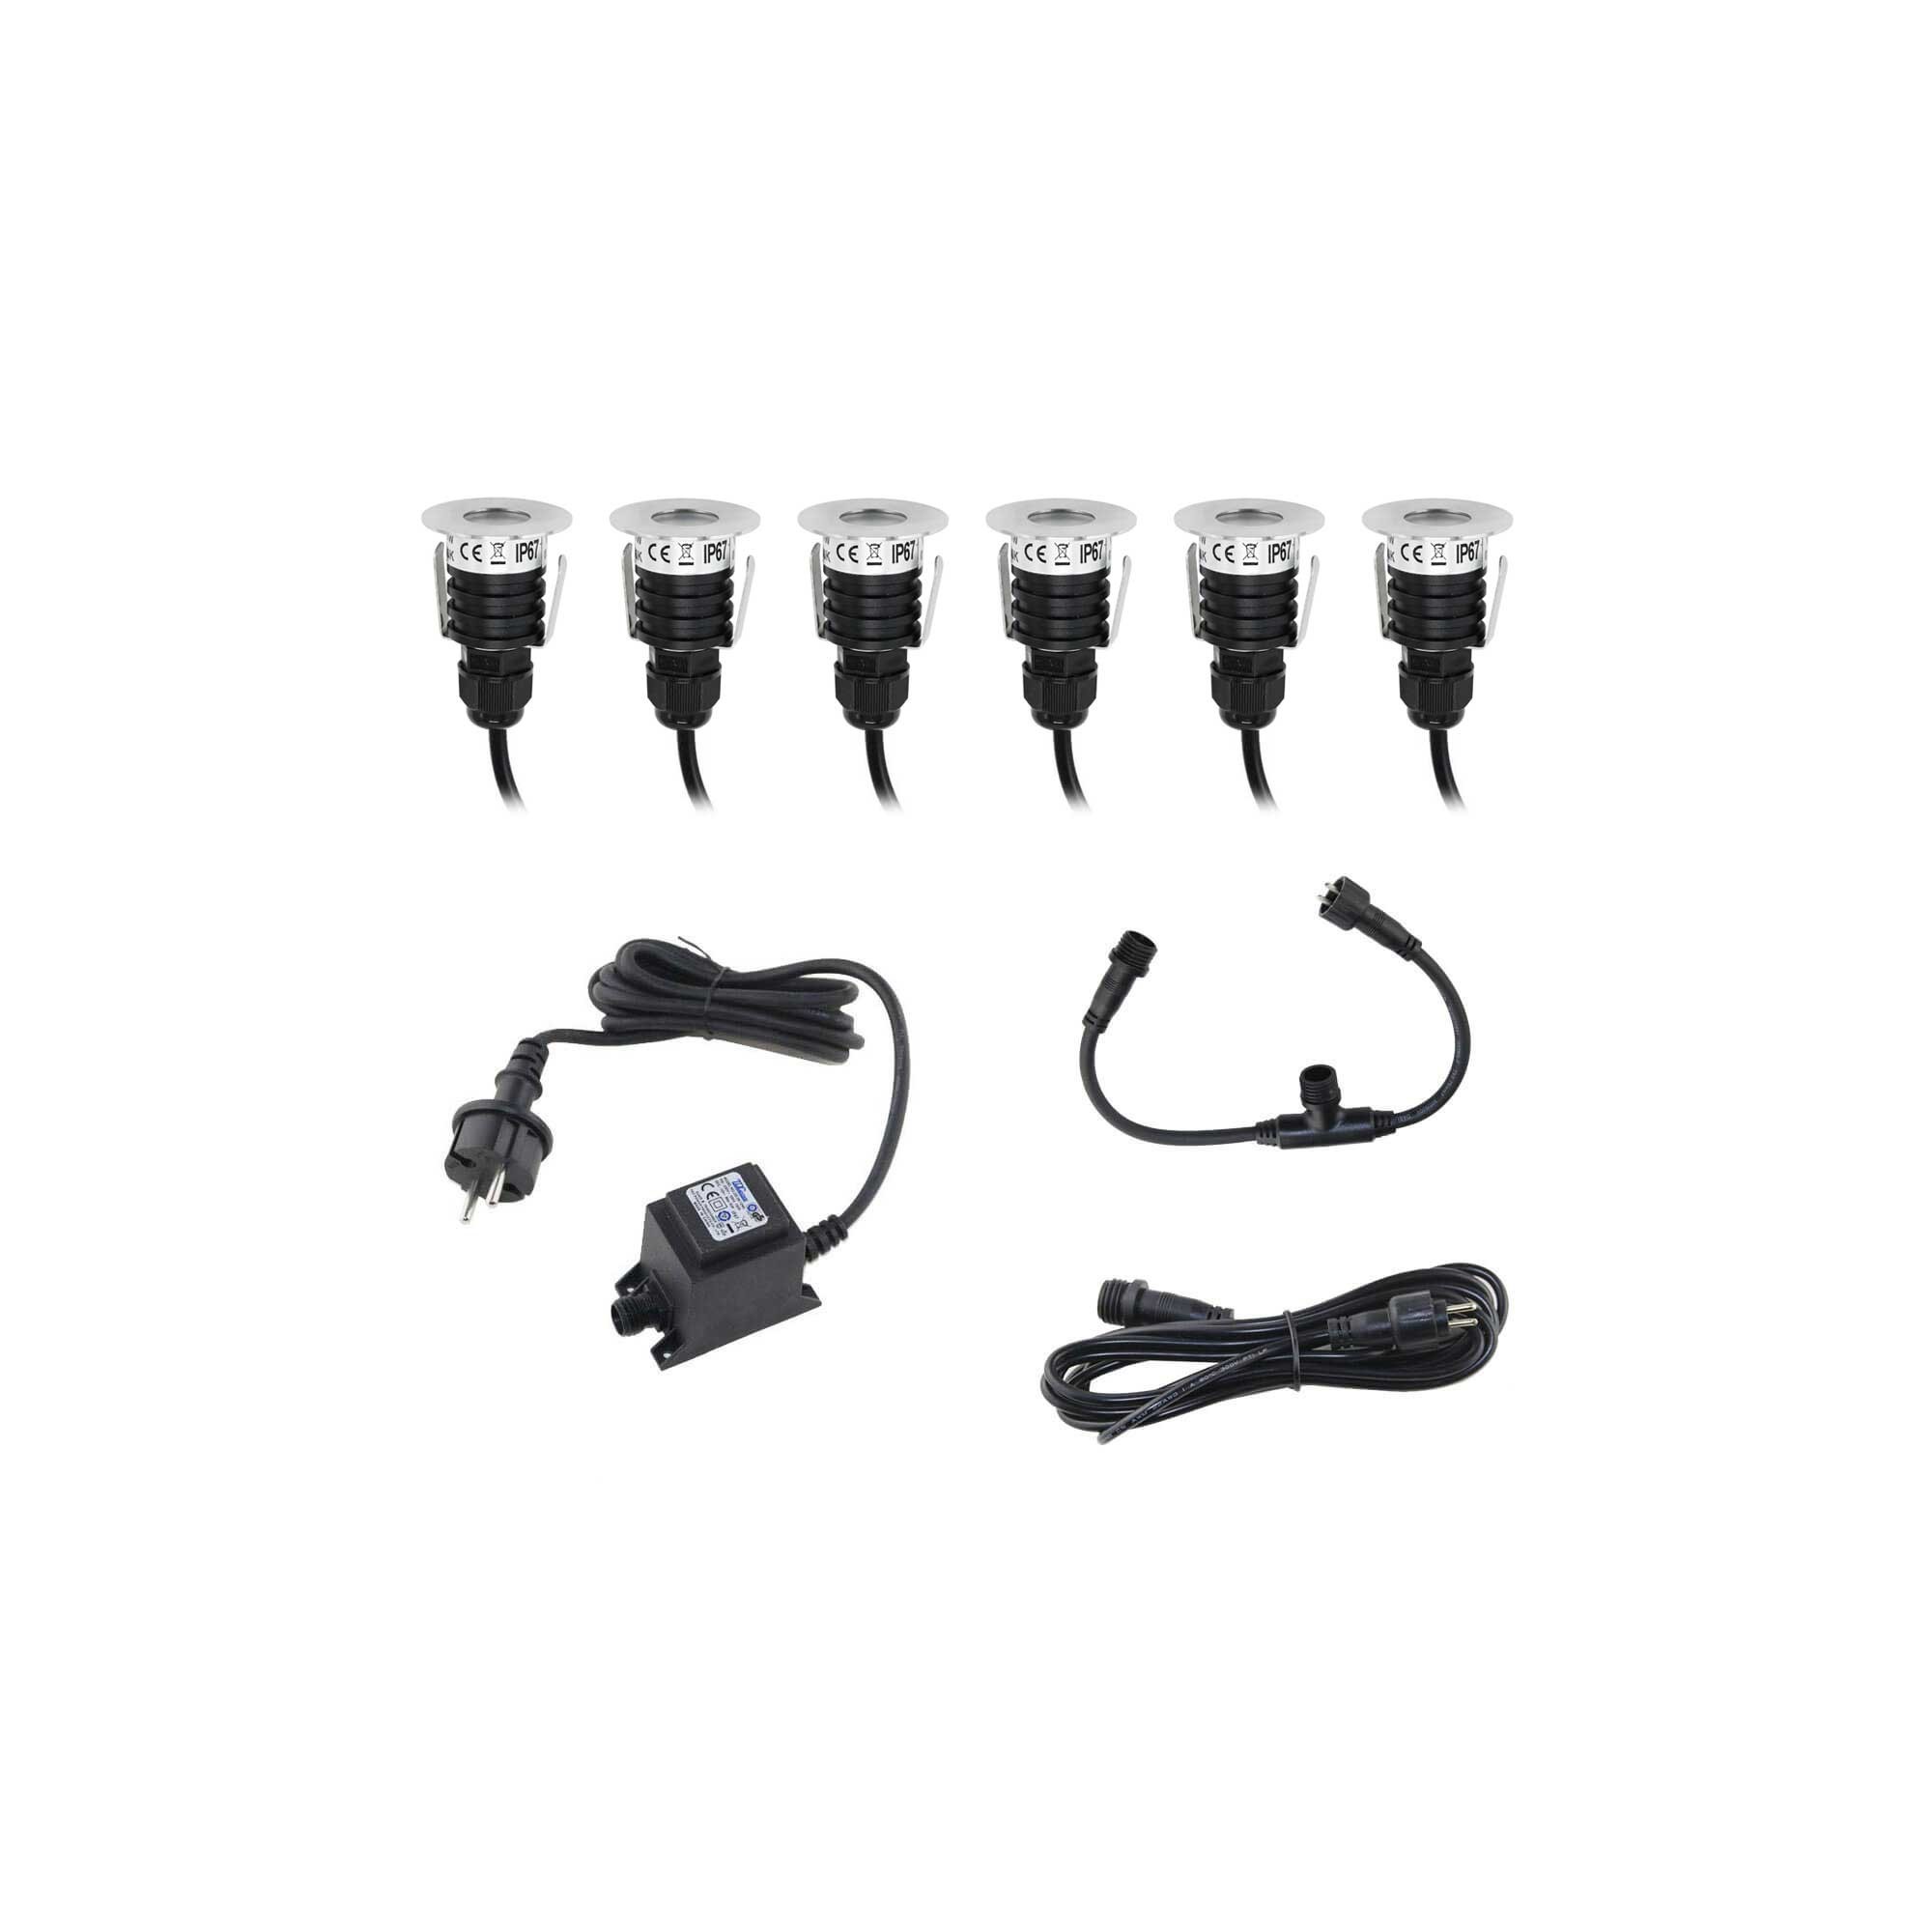 Mini LED recessed floor luminaire 6-piece KIT - Round - incl. transformer & cable